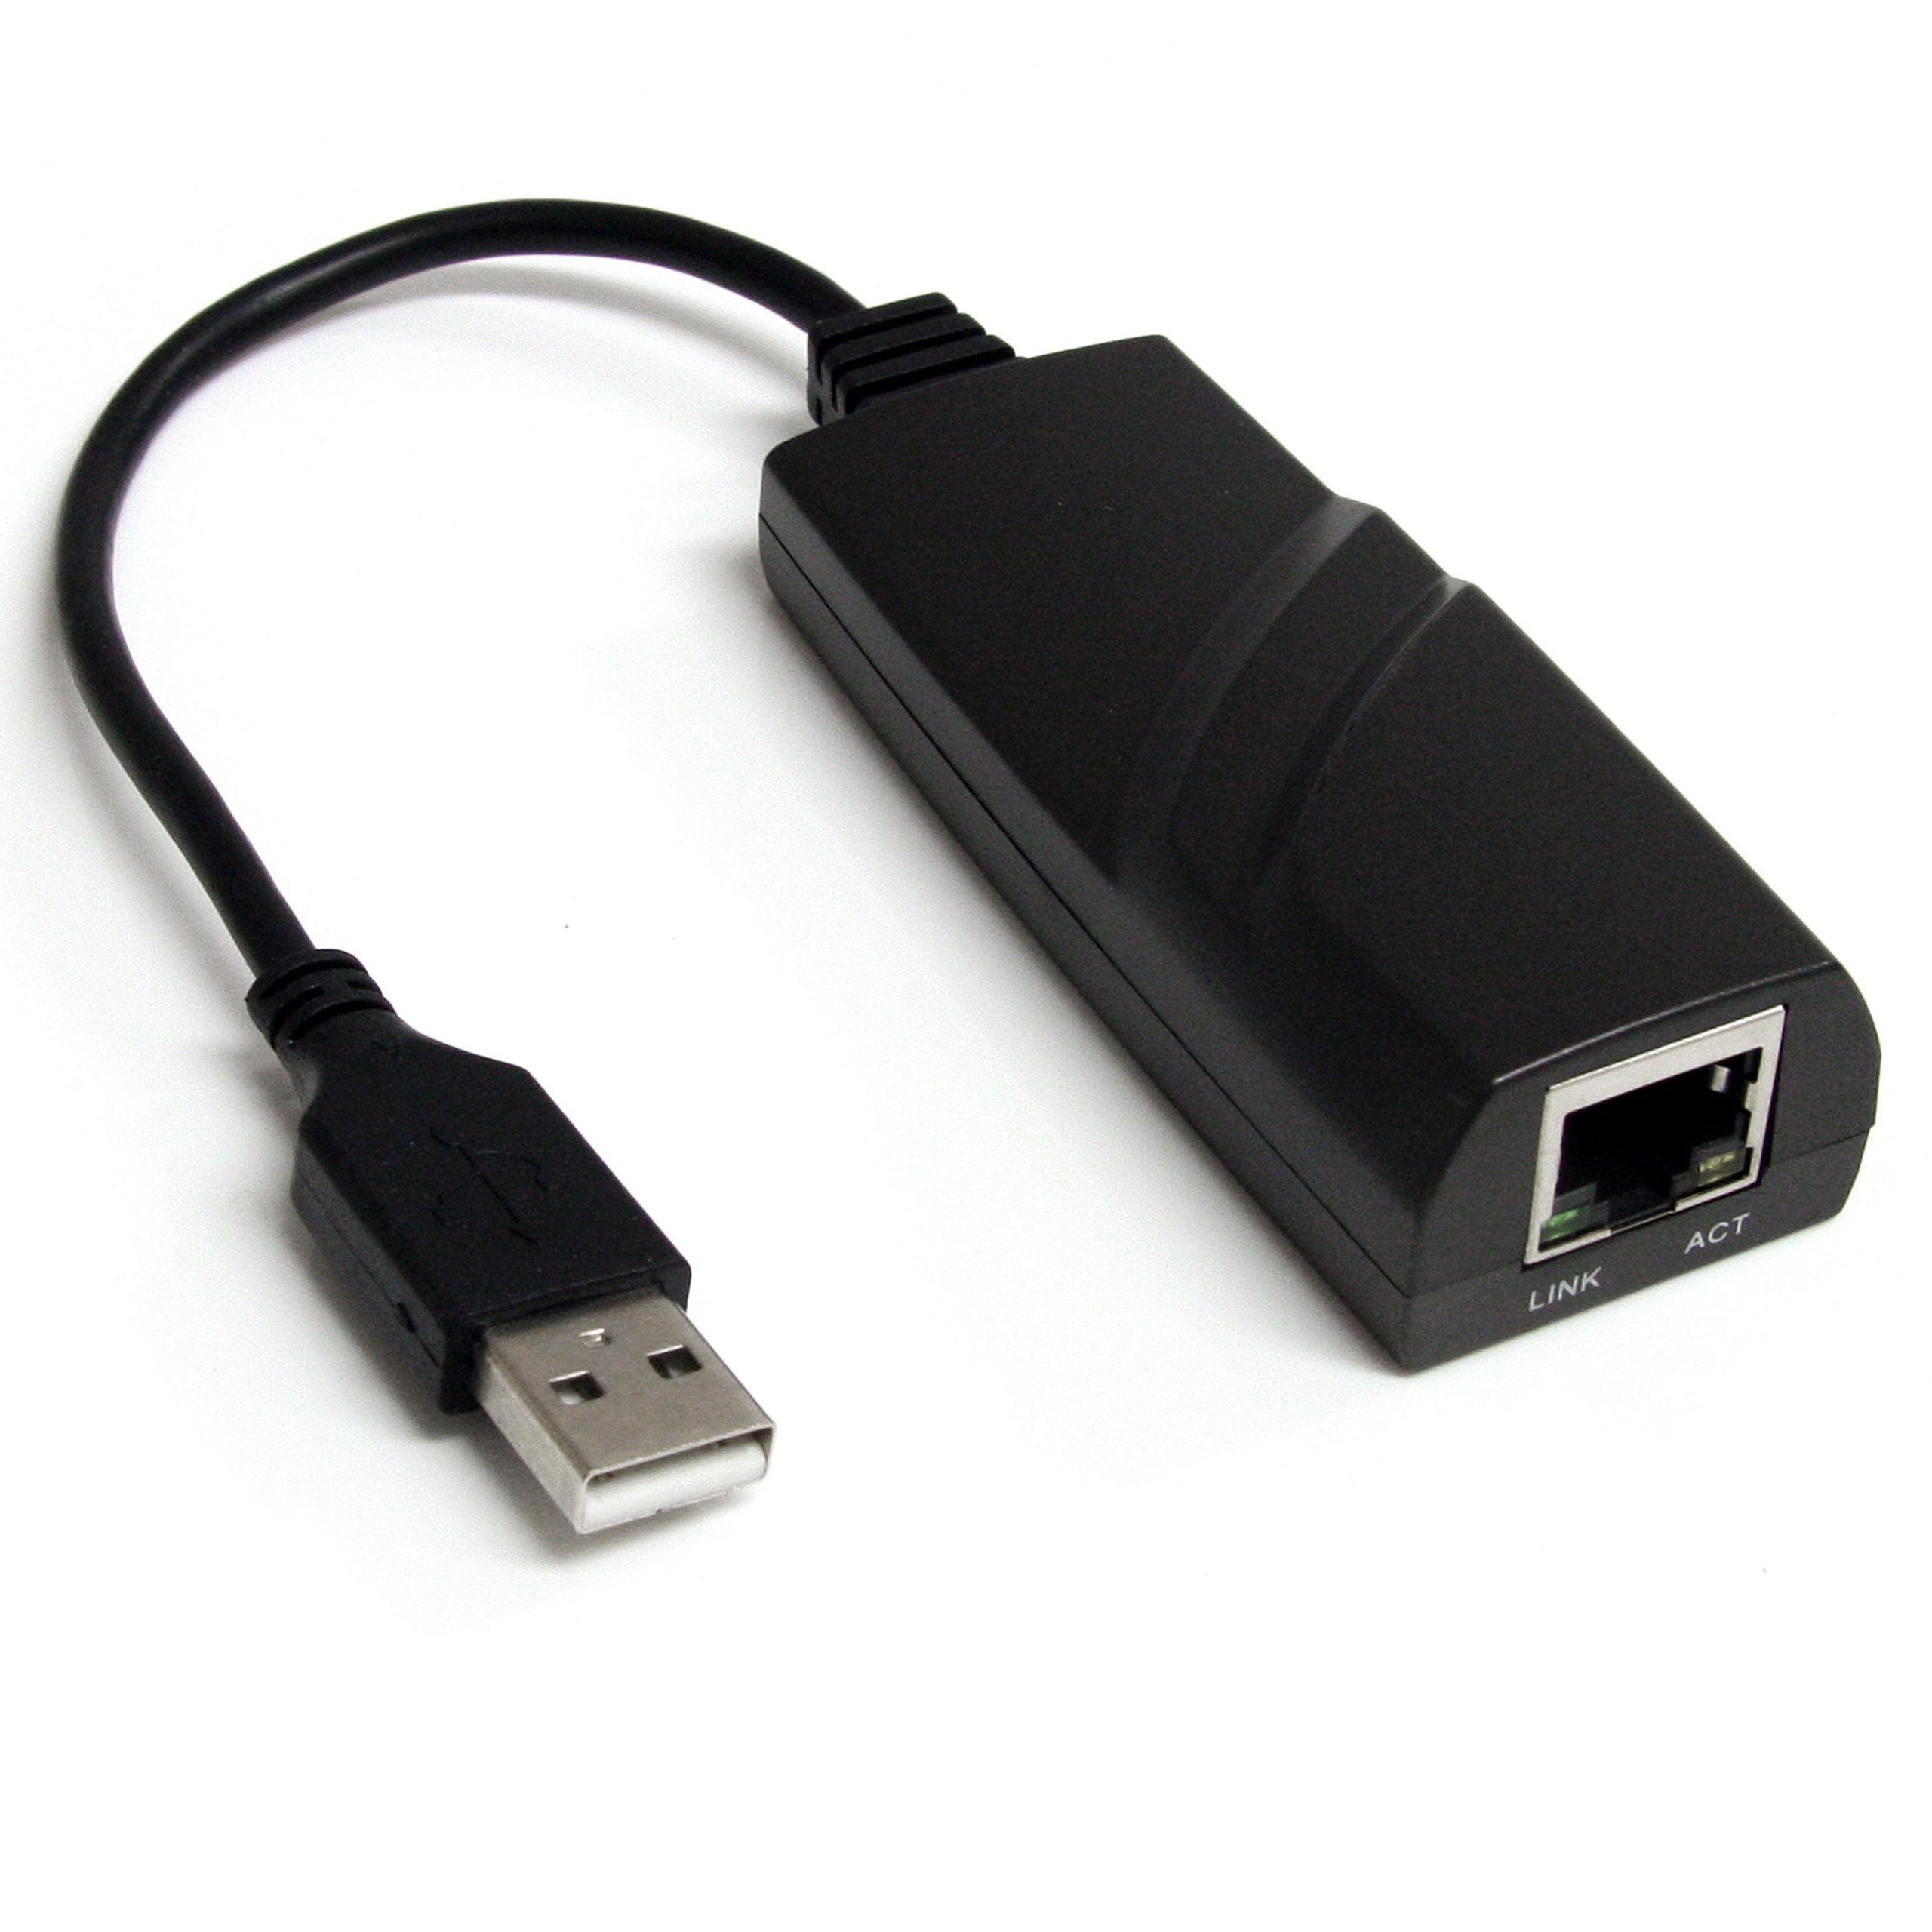 What Is Ethernet 2 Adapter